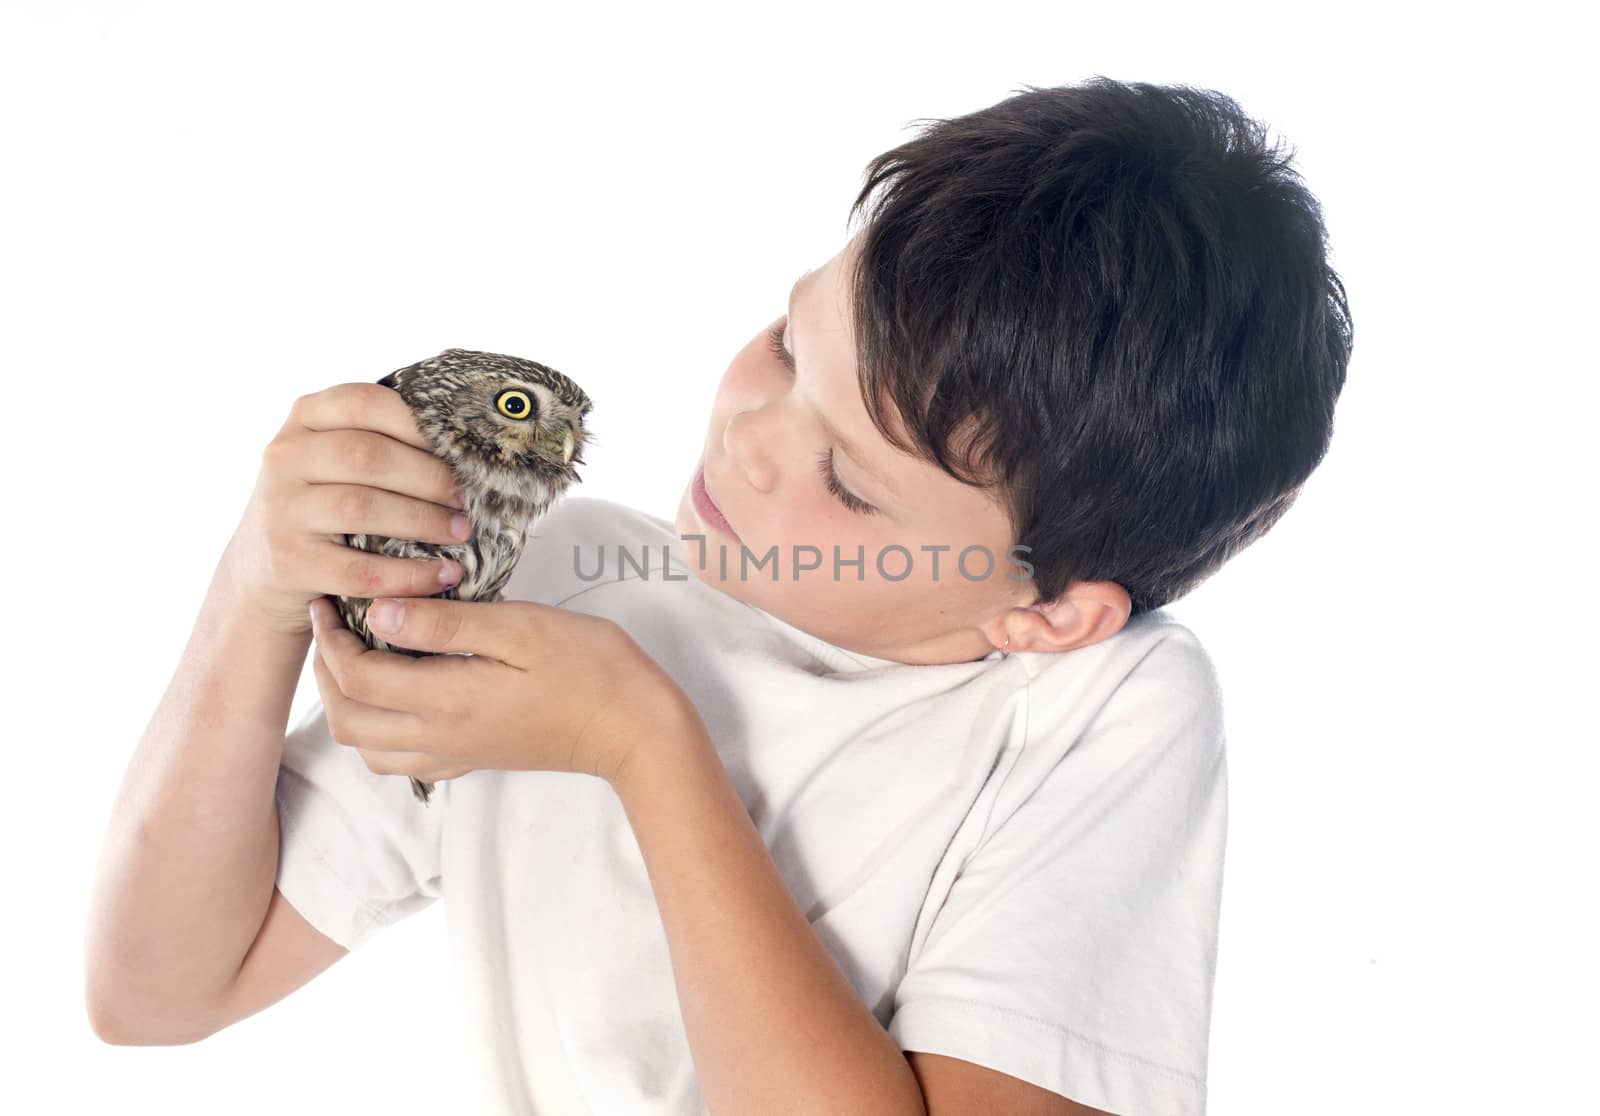 Little owl and child by cynoclub